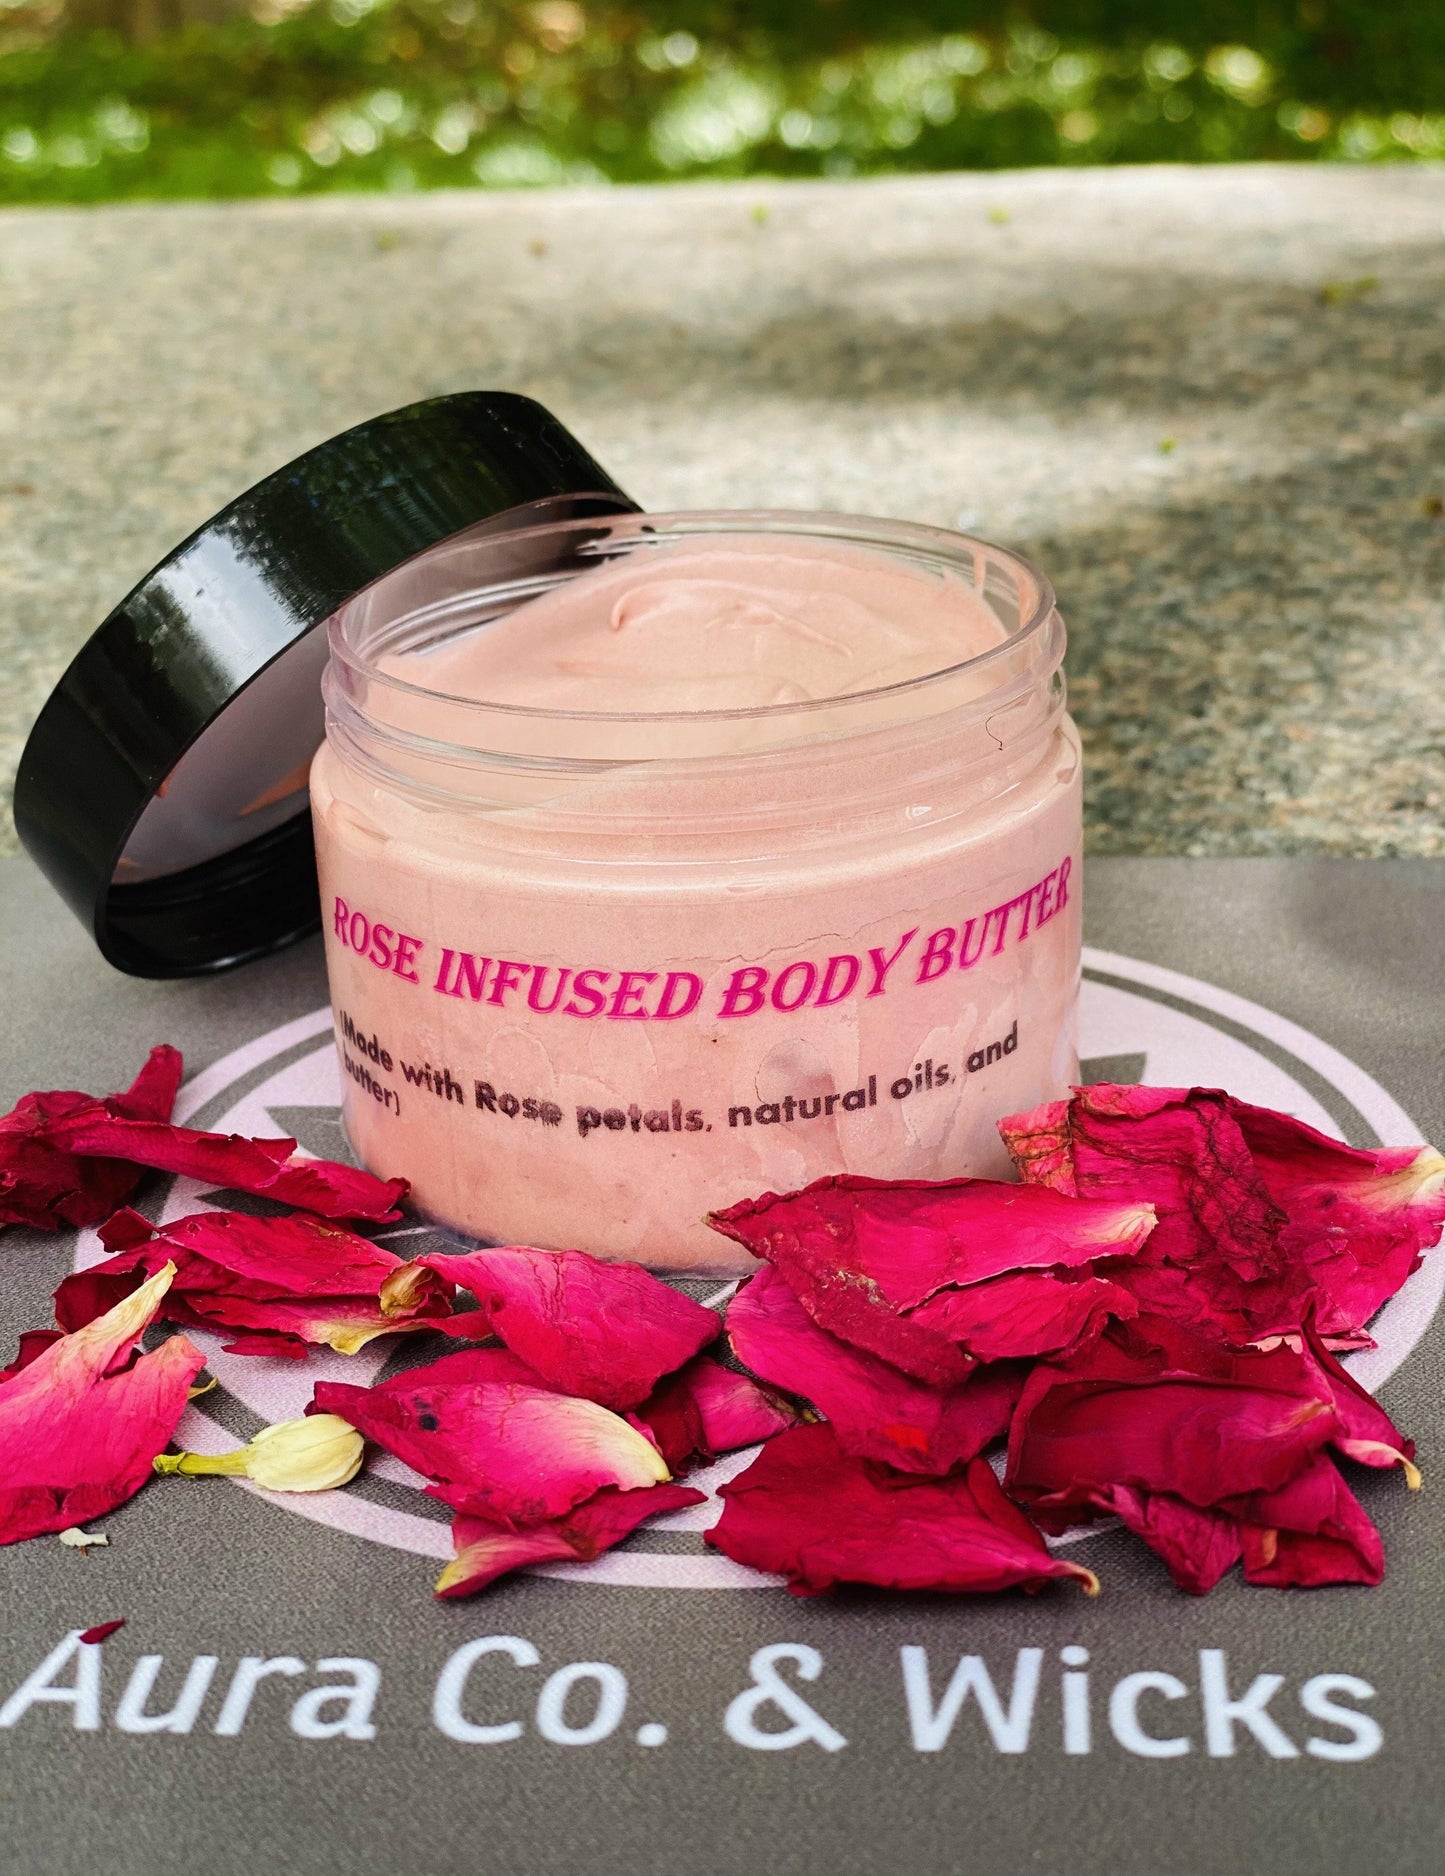 Rose Infused Body Butter - Aura Co. & Wicks